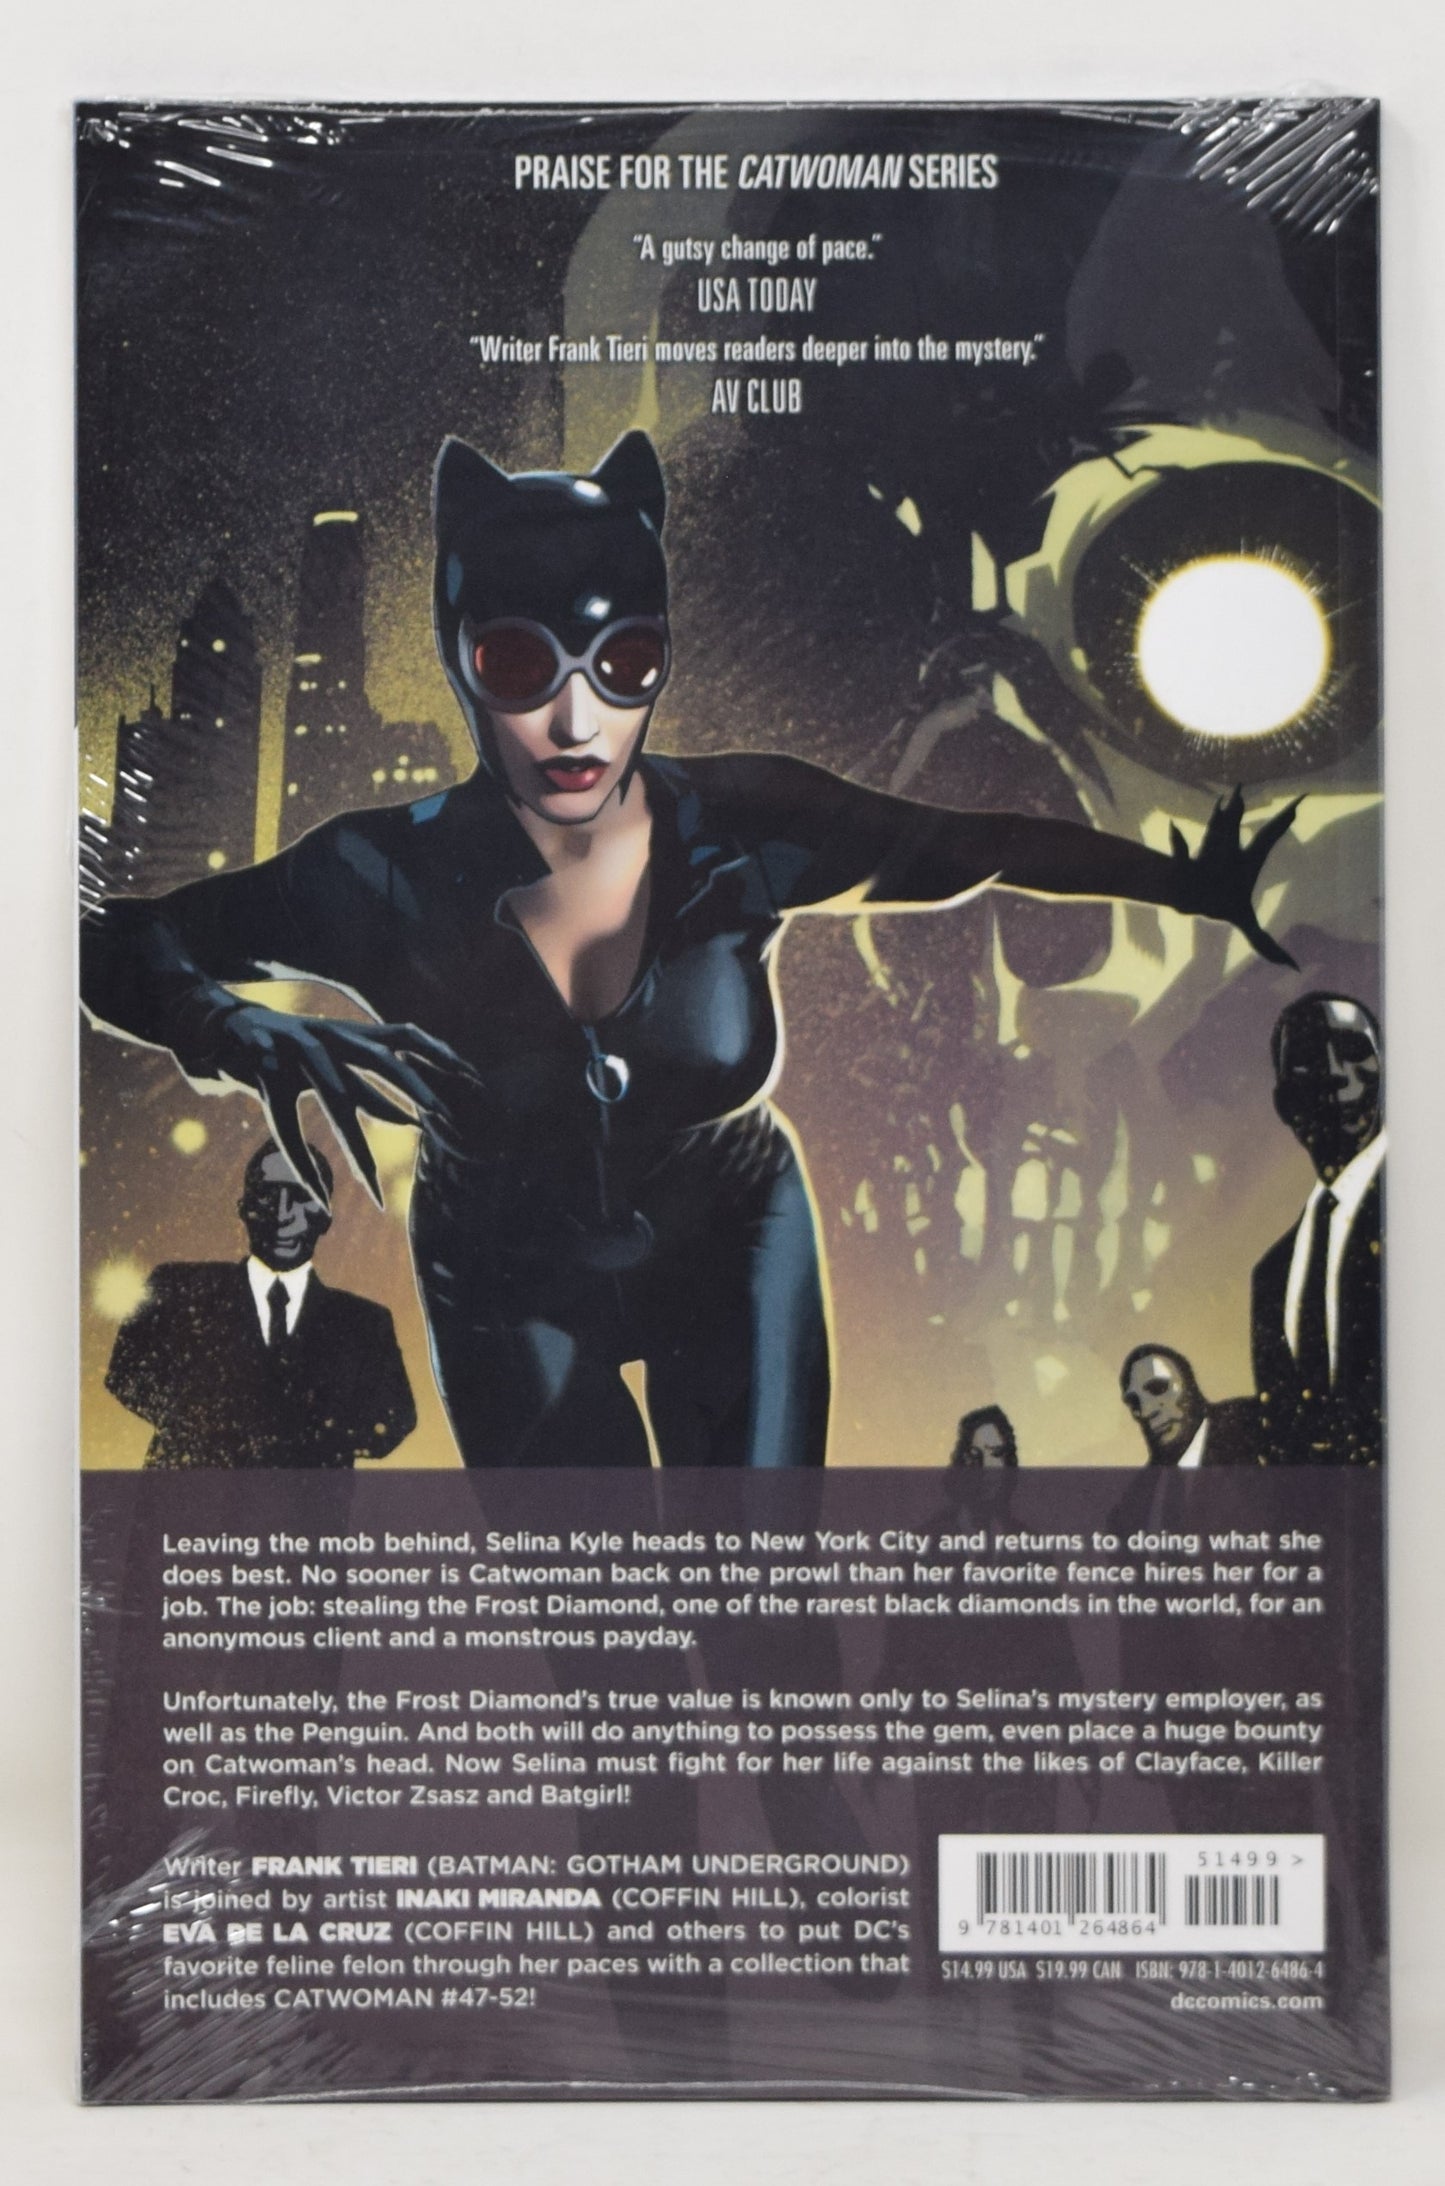 Catwoman Volume 8 Run Like Hell DC 2016 GN NM New